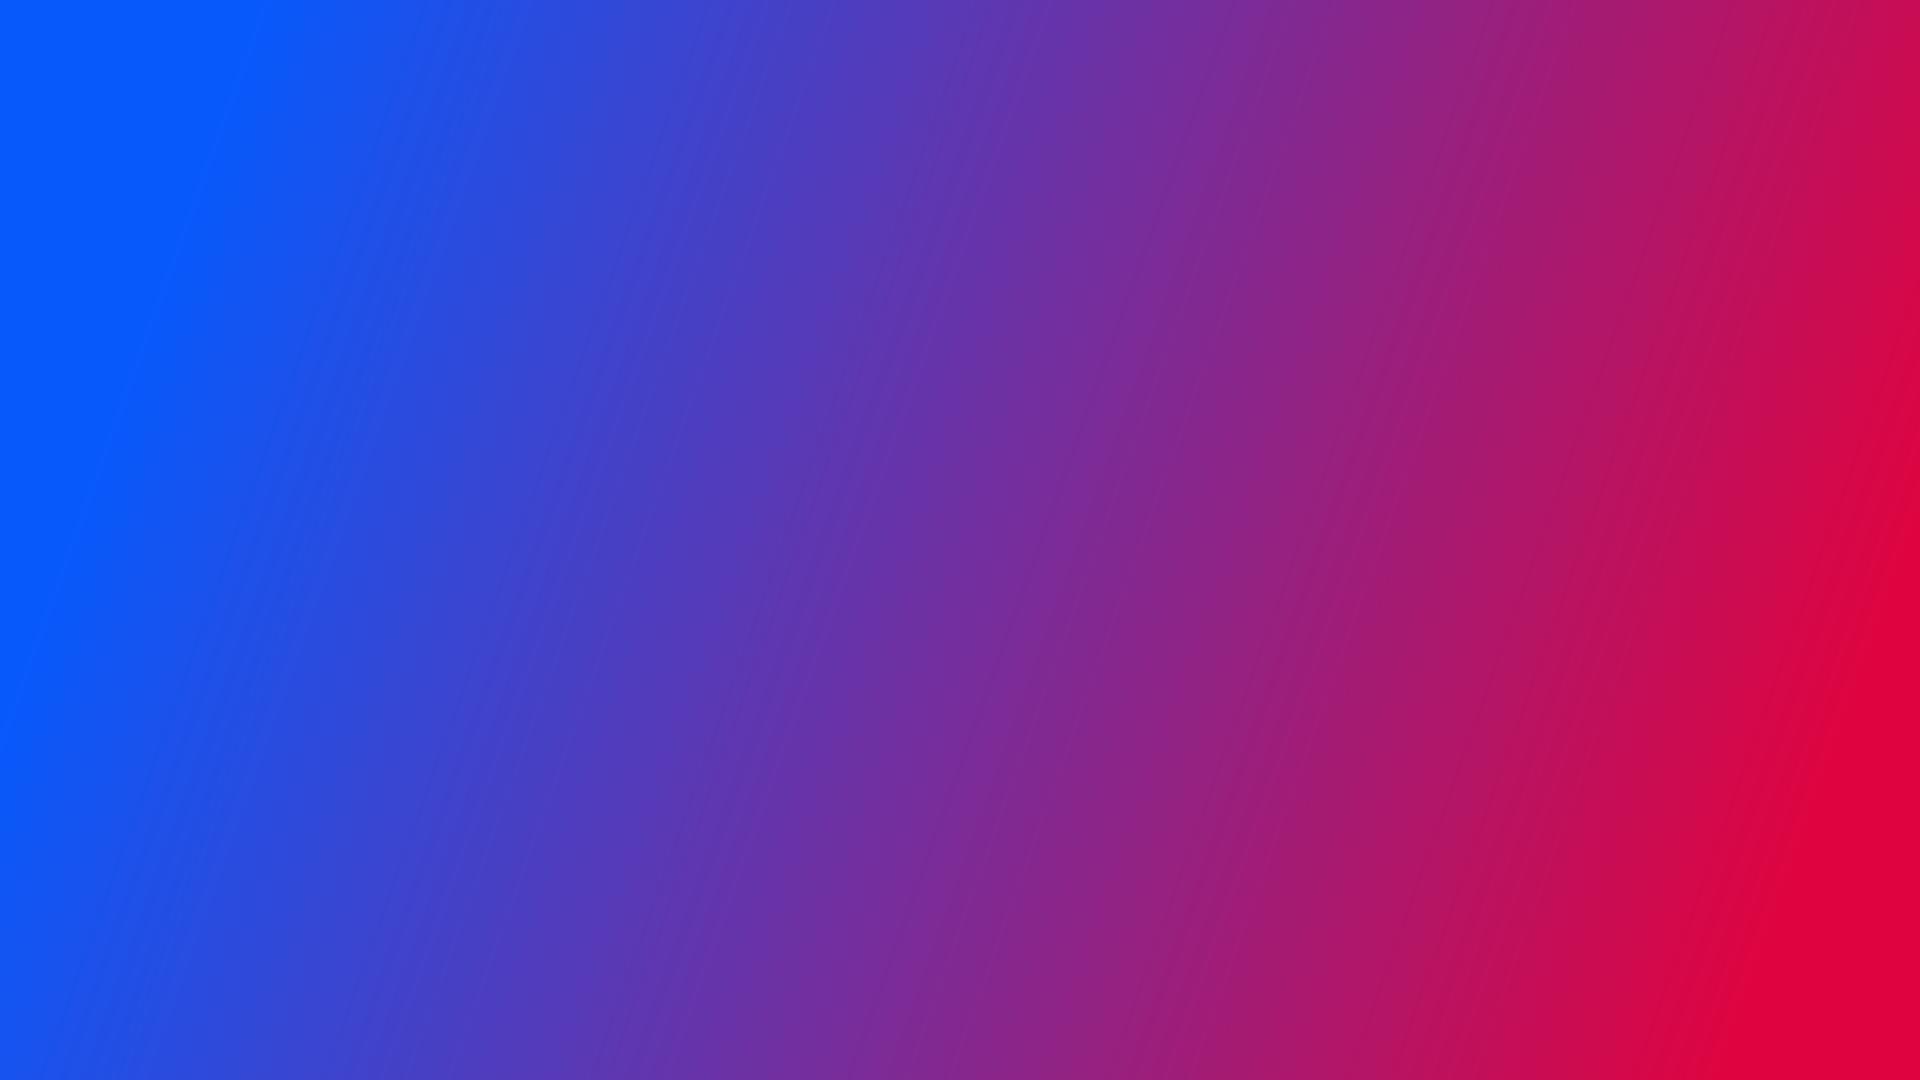 Blue to Red Gradient